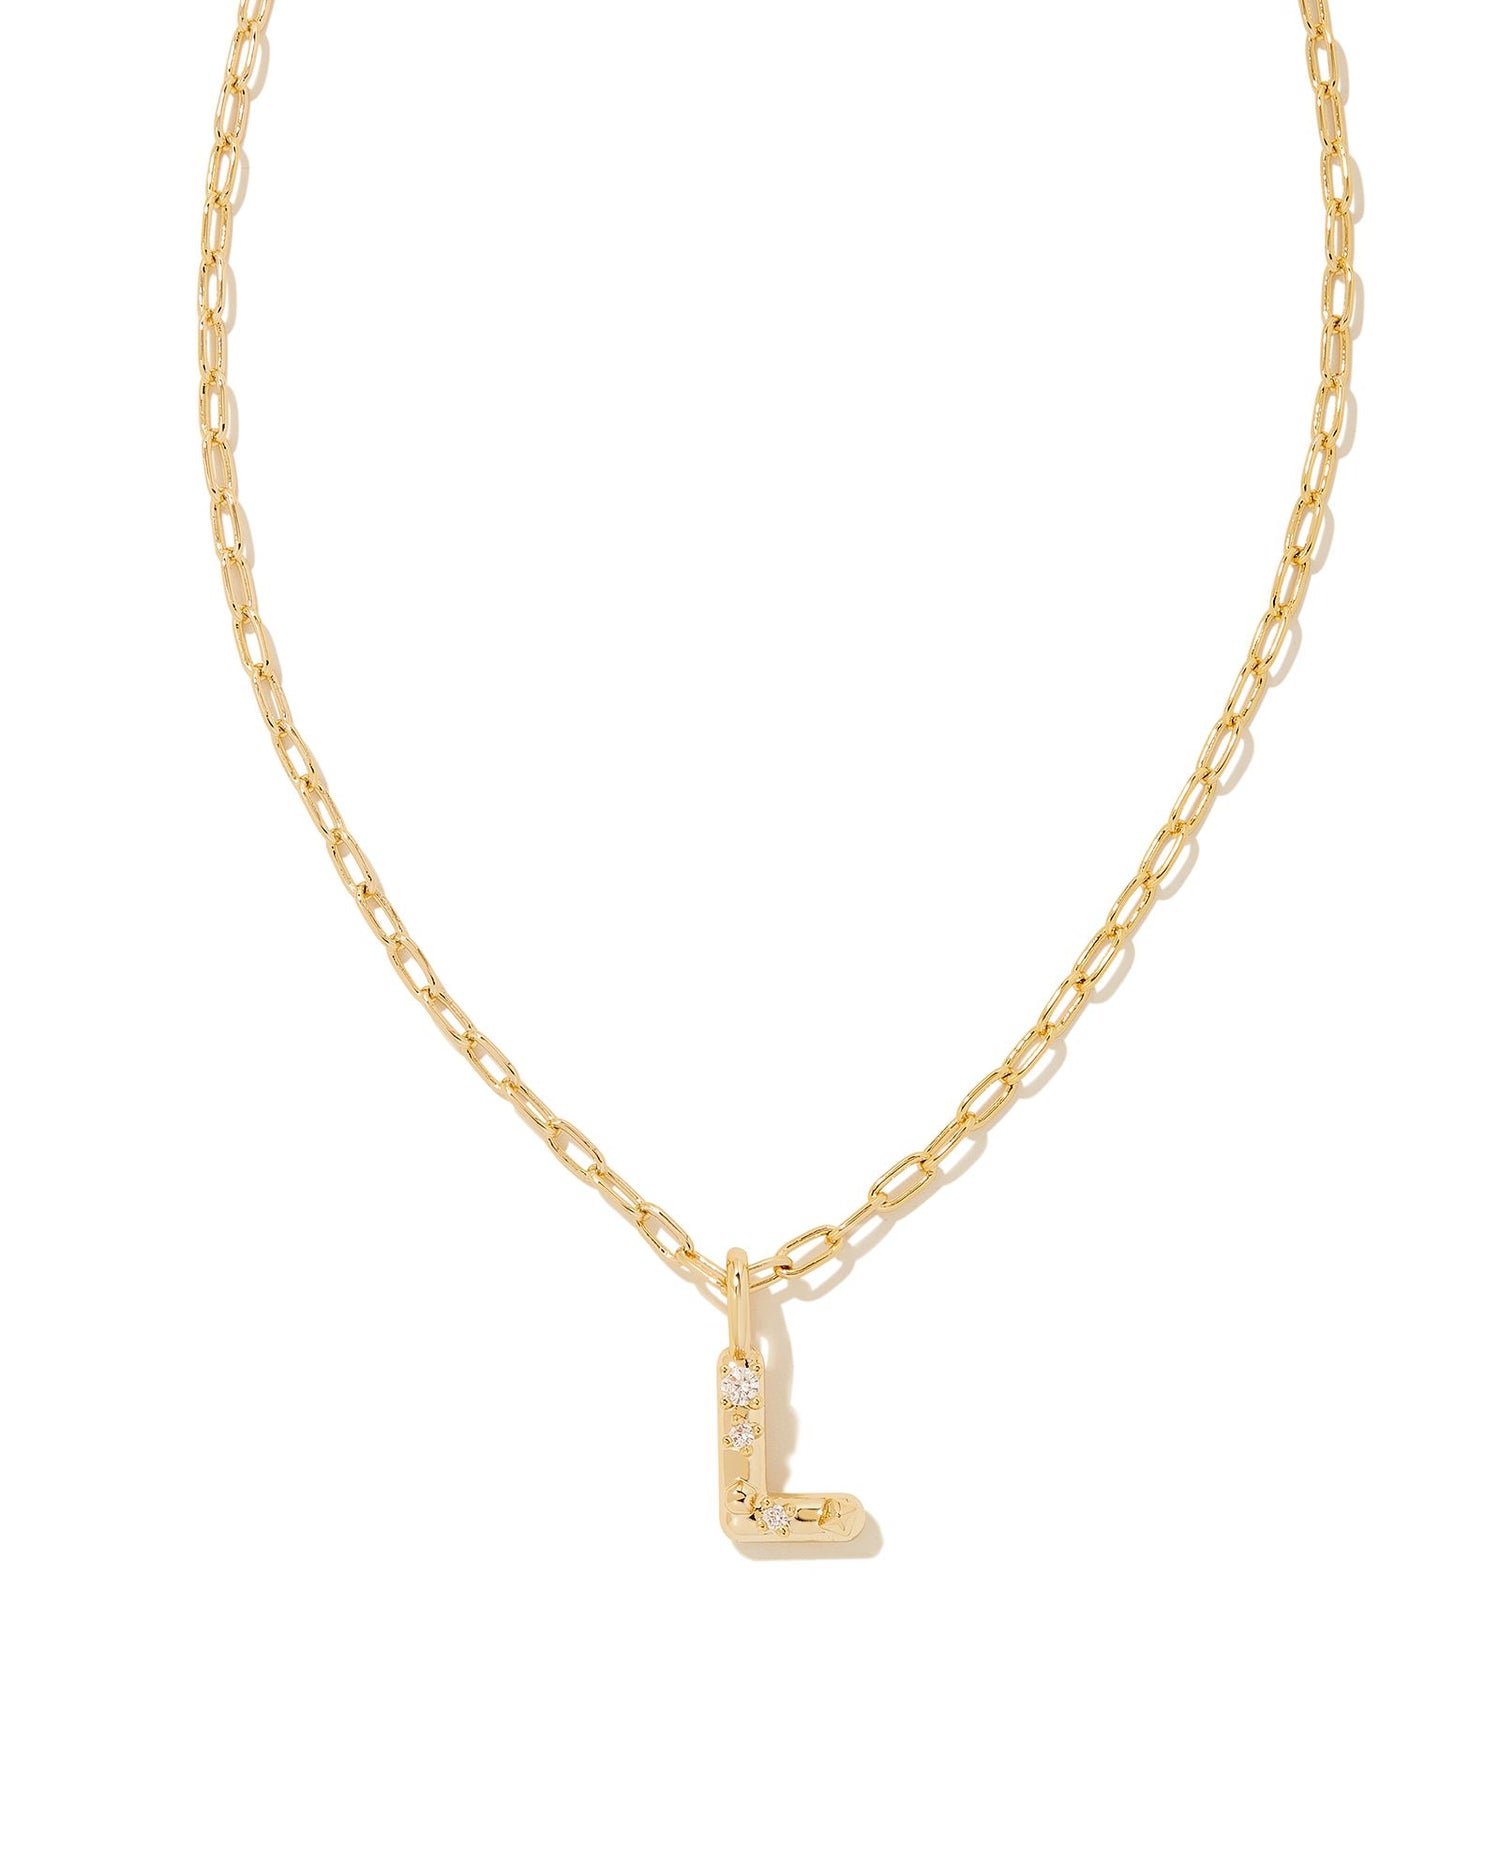 Personalize your everyday look with the Crystal Letter Short Pendant Necklace in White Crystal. Whether you’re rocking your initial or a loved one’s, this sentimental layer is one you’ll keep coming back to again and again.  Dimensions- 16' CHAIN WITH 3' EXTENDER, 0.62'L X 0.35"W PENDANT Metal- 14K Gold plated over brass Closure- Lobster Clasp Material-   White CZ Letter L